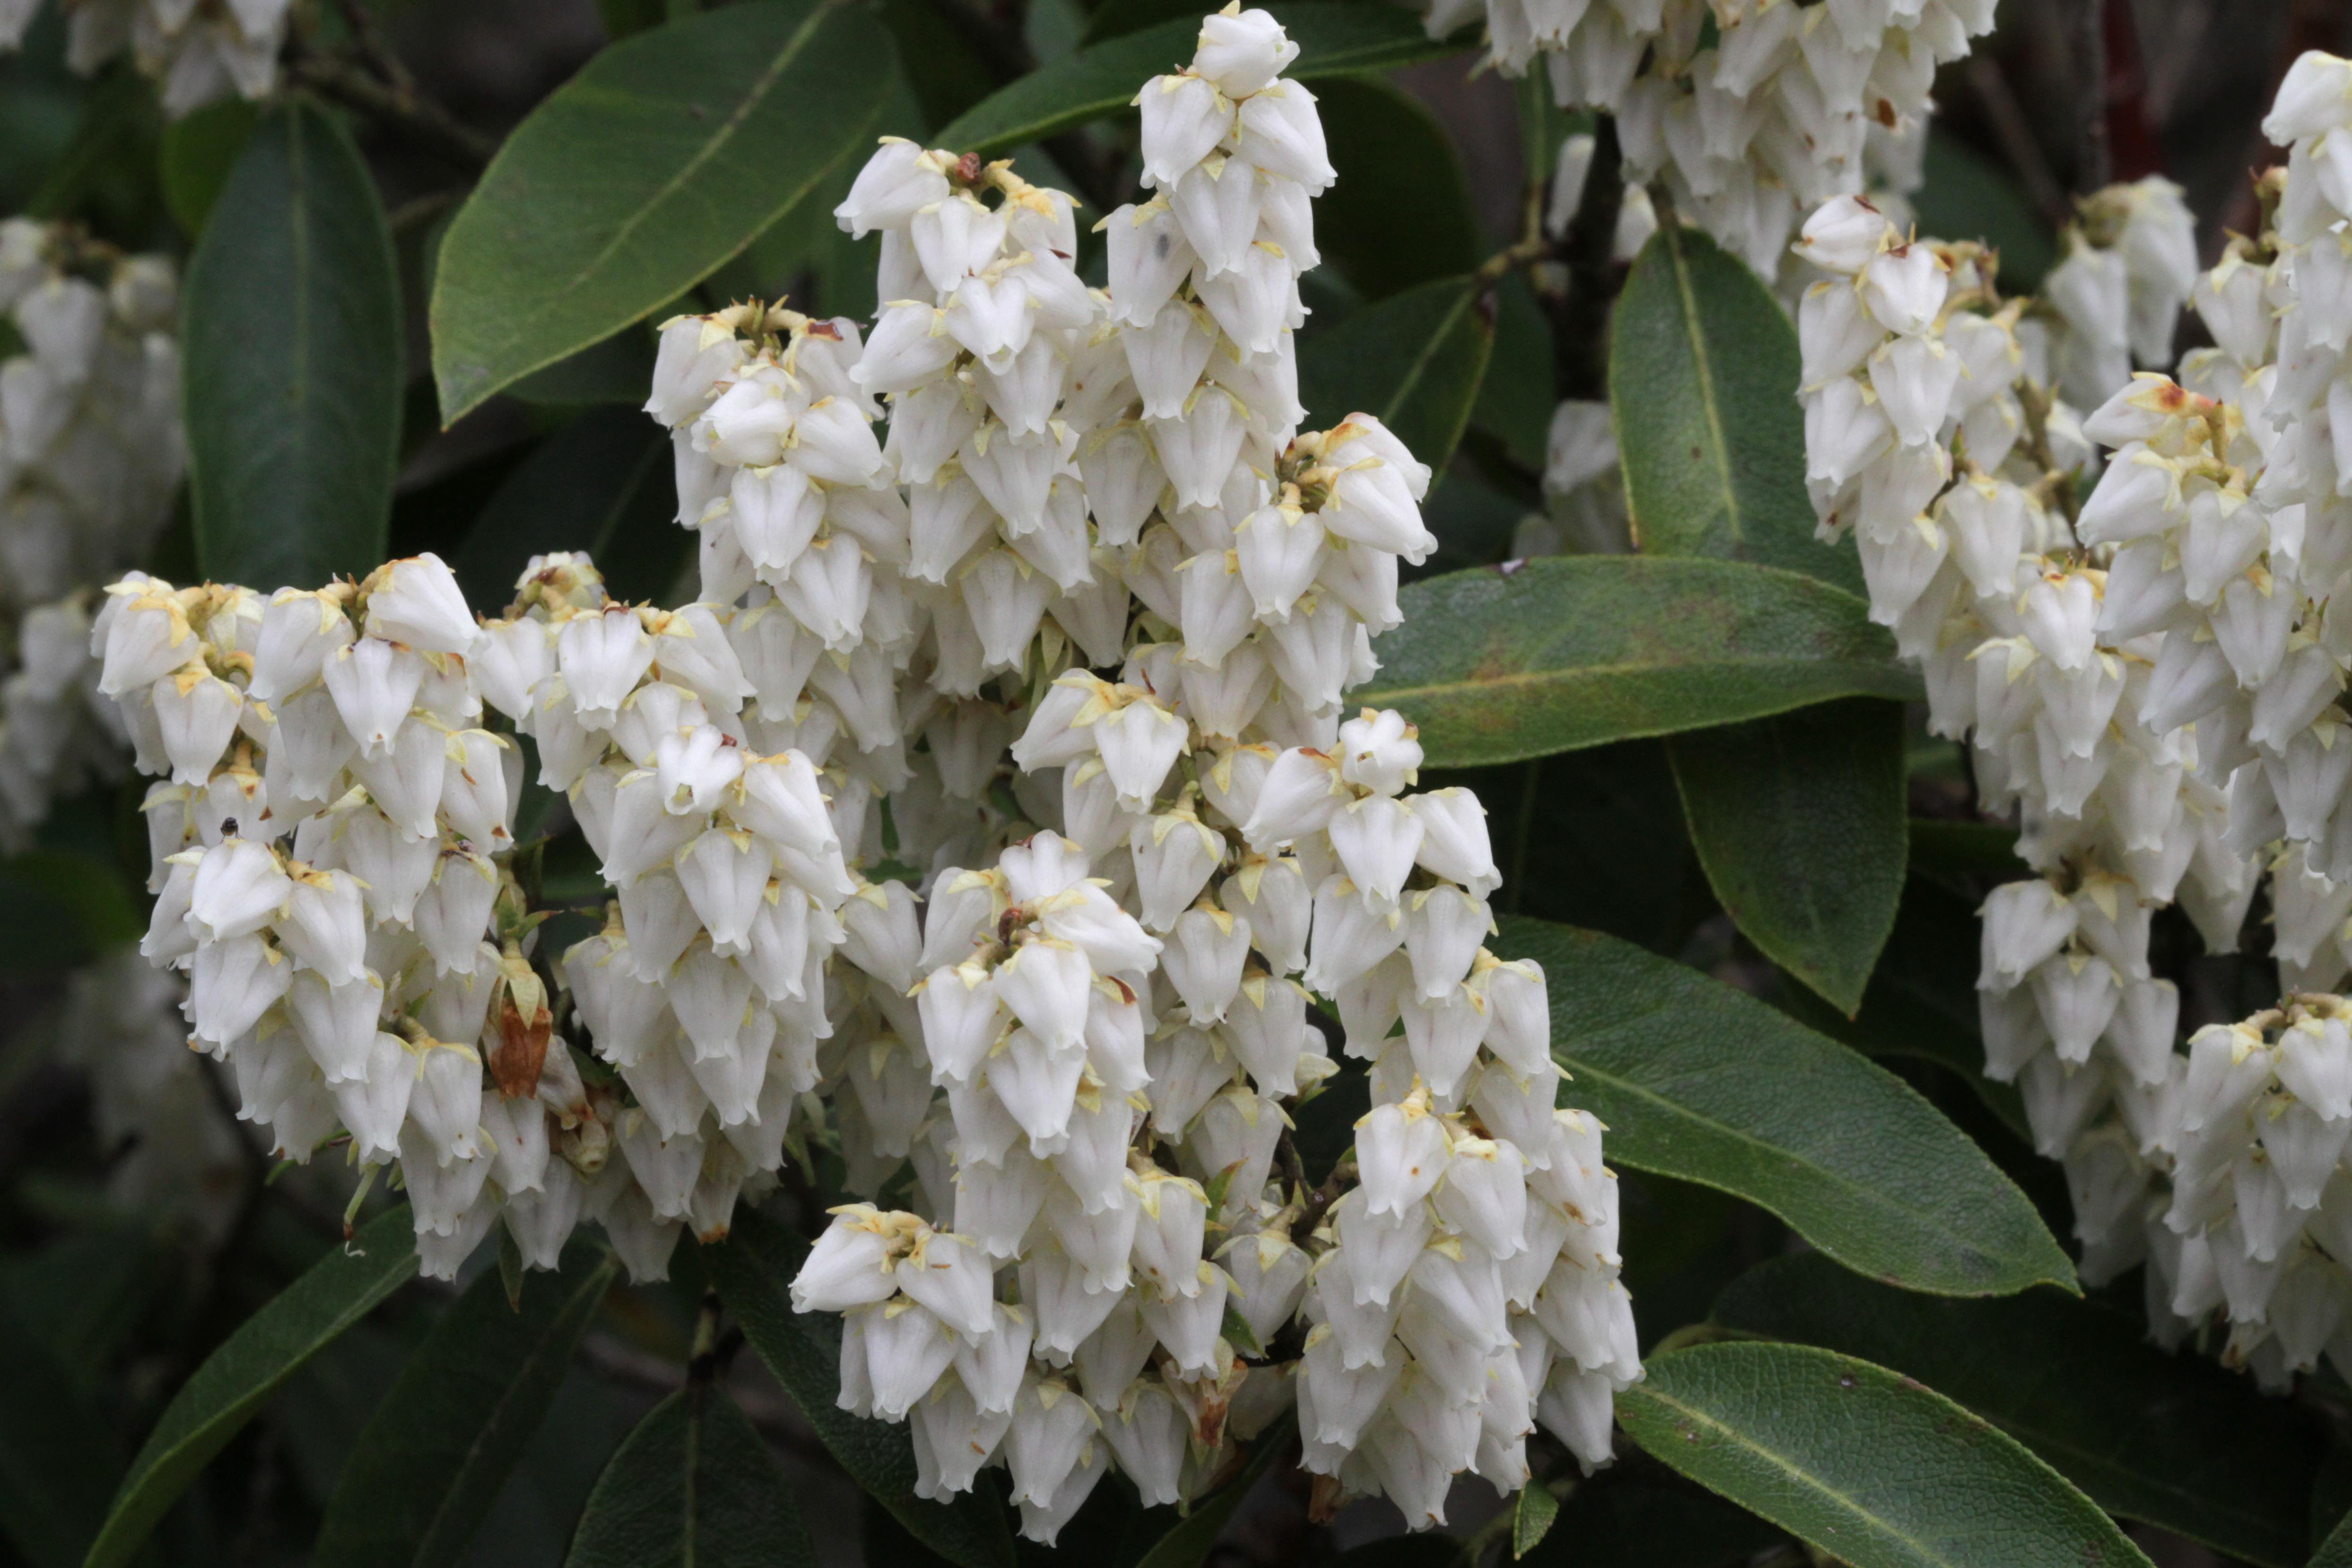 The Scientific Name is Pieris floribunda. You will likely hear them called Mountain Andromeda, Evergreen Mountain Fetterbush. This picture shows the Pieris floribunda blossom detail. of Pieris floribunda